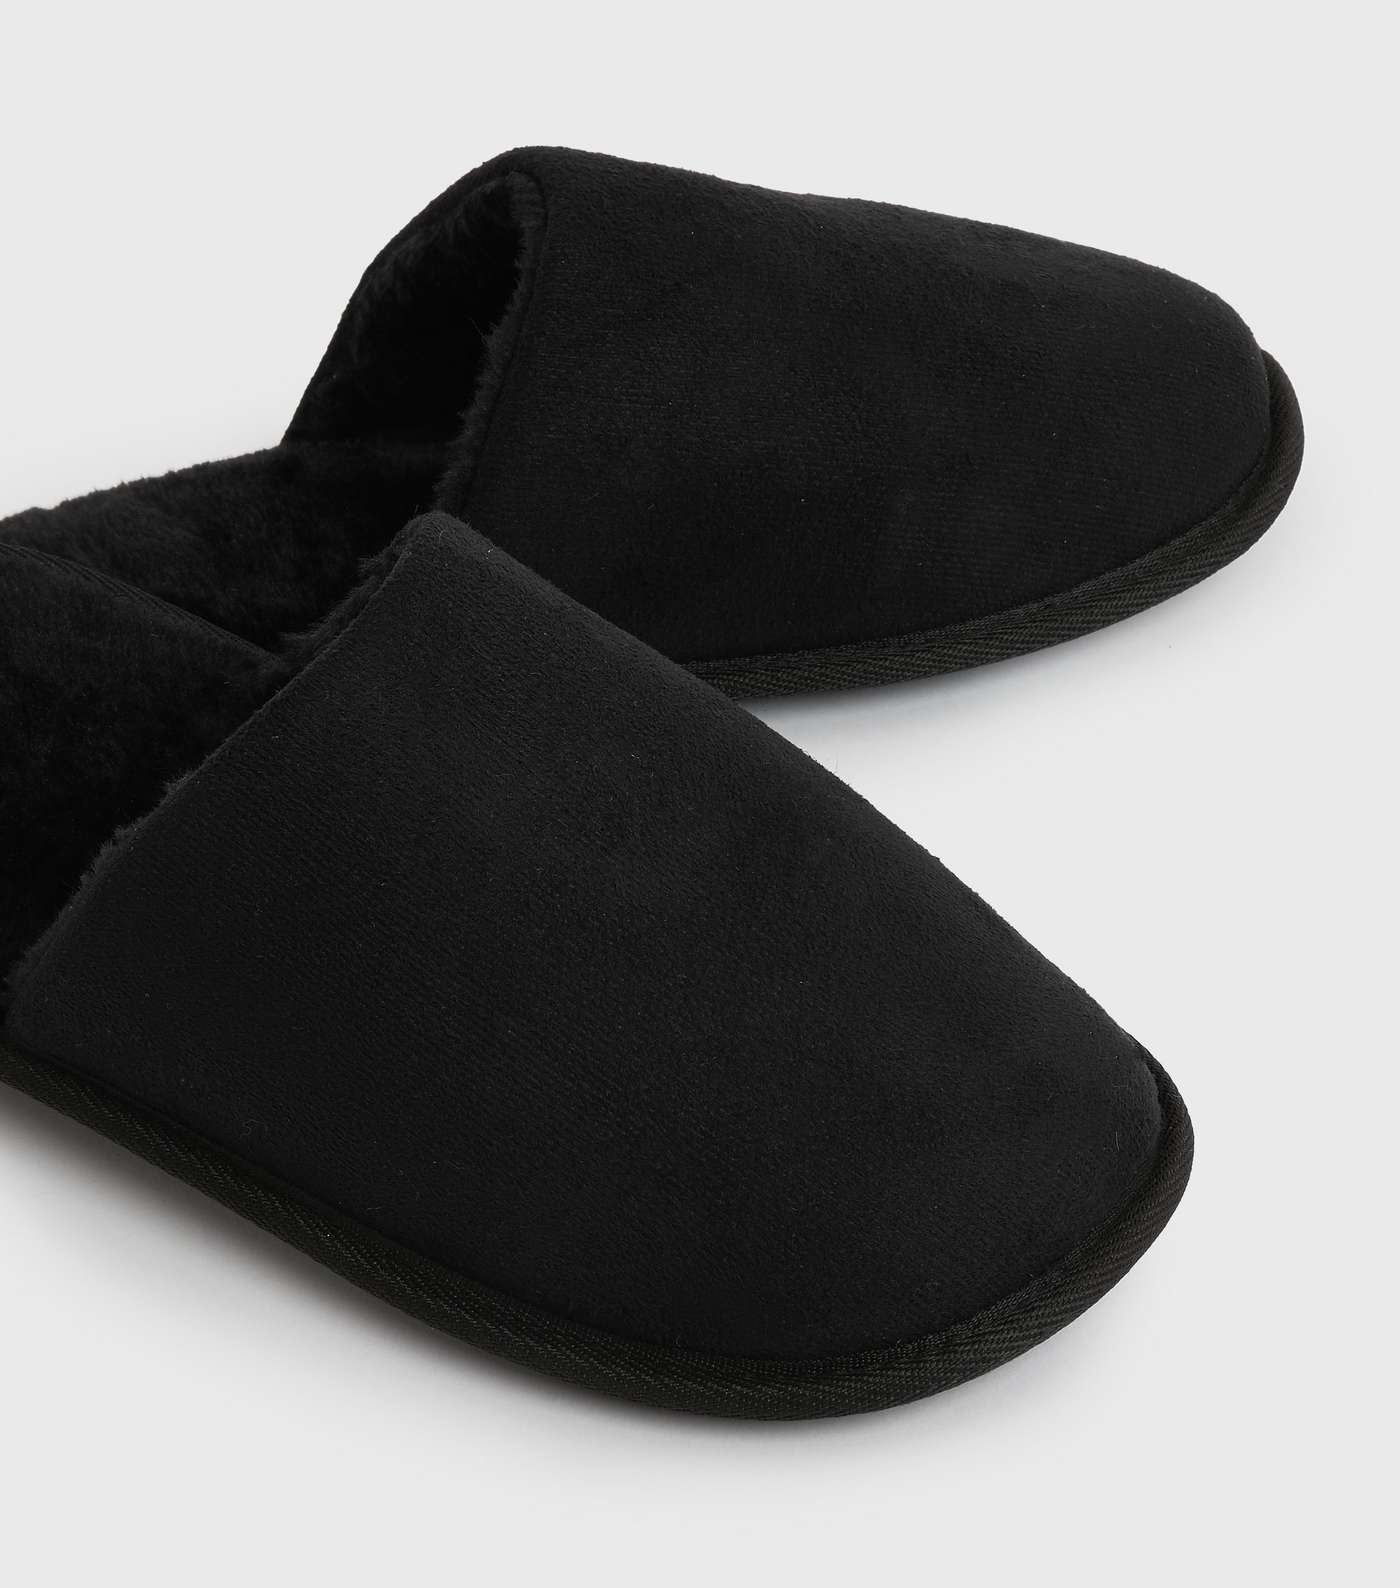 Black Suedette Teddy Lined Mule Slippers Image 3